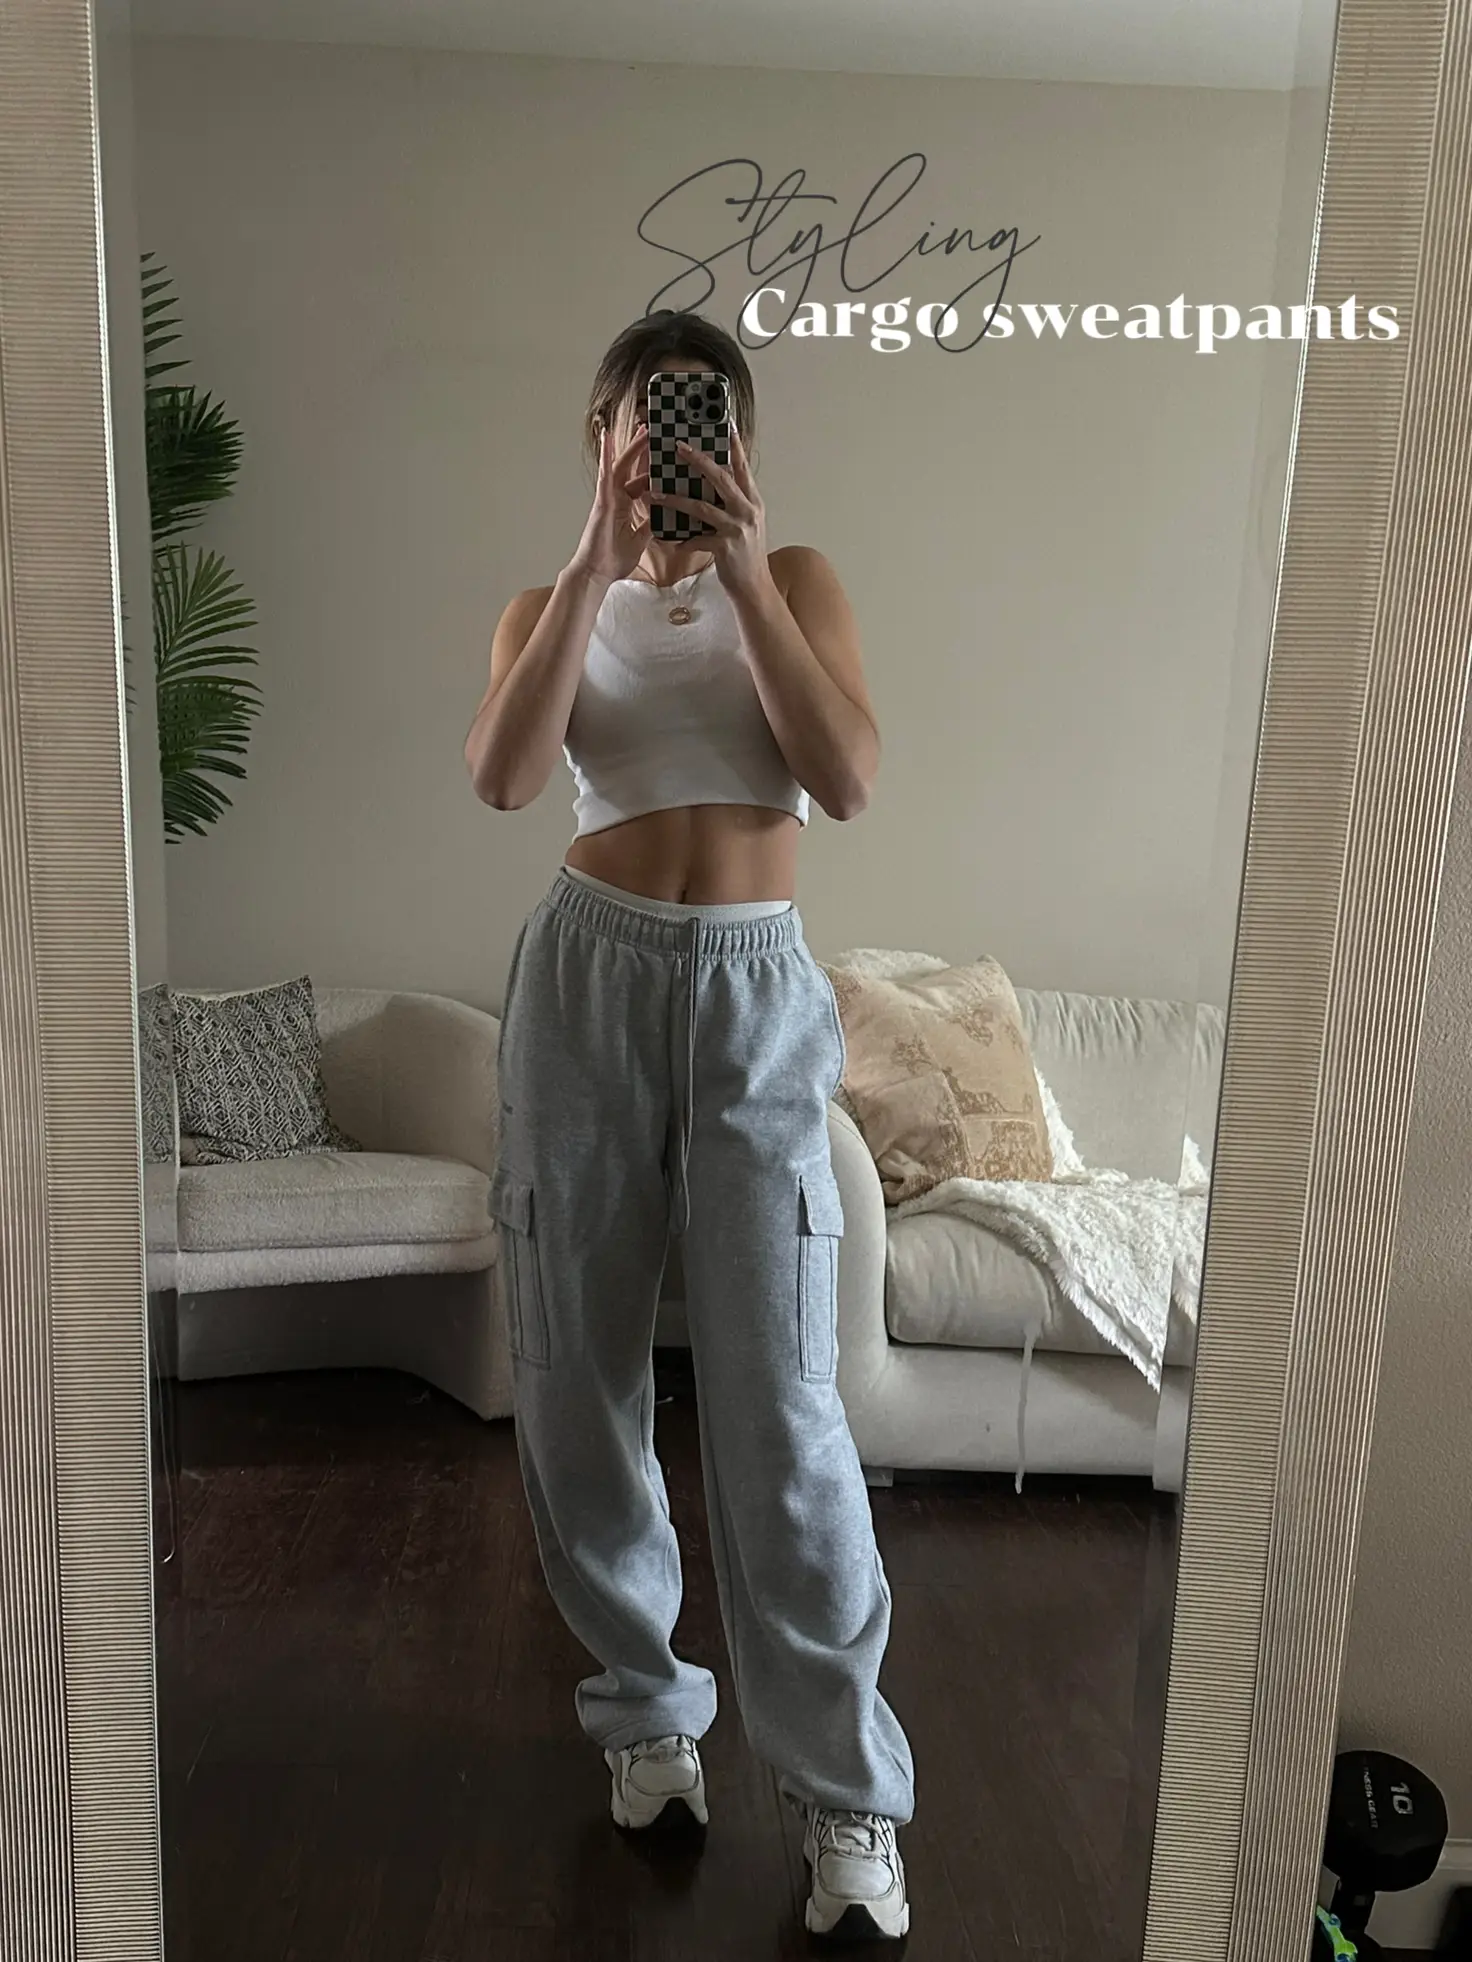 OOTD: cargo sweatpants, Gallery posted by Brianna Filos